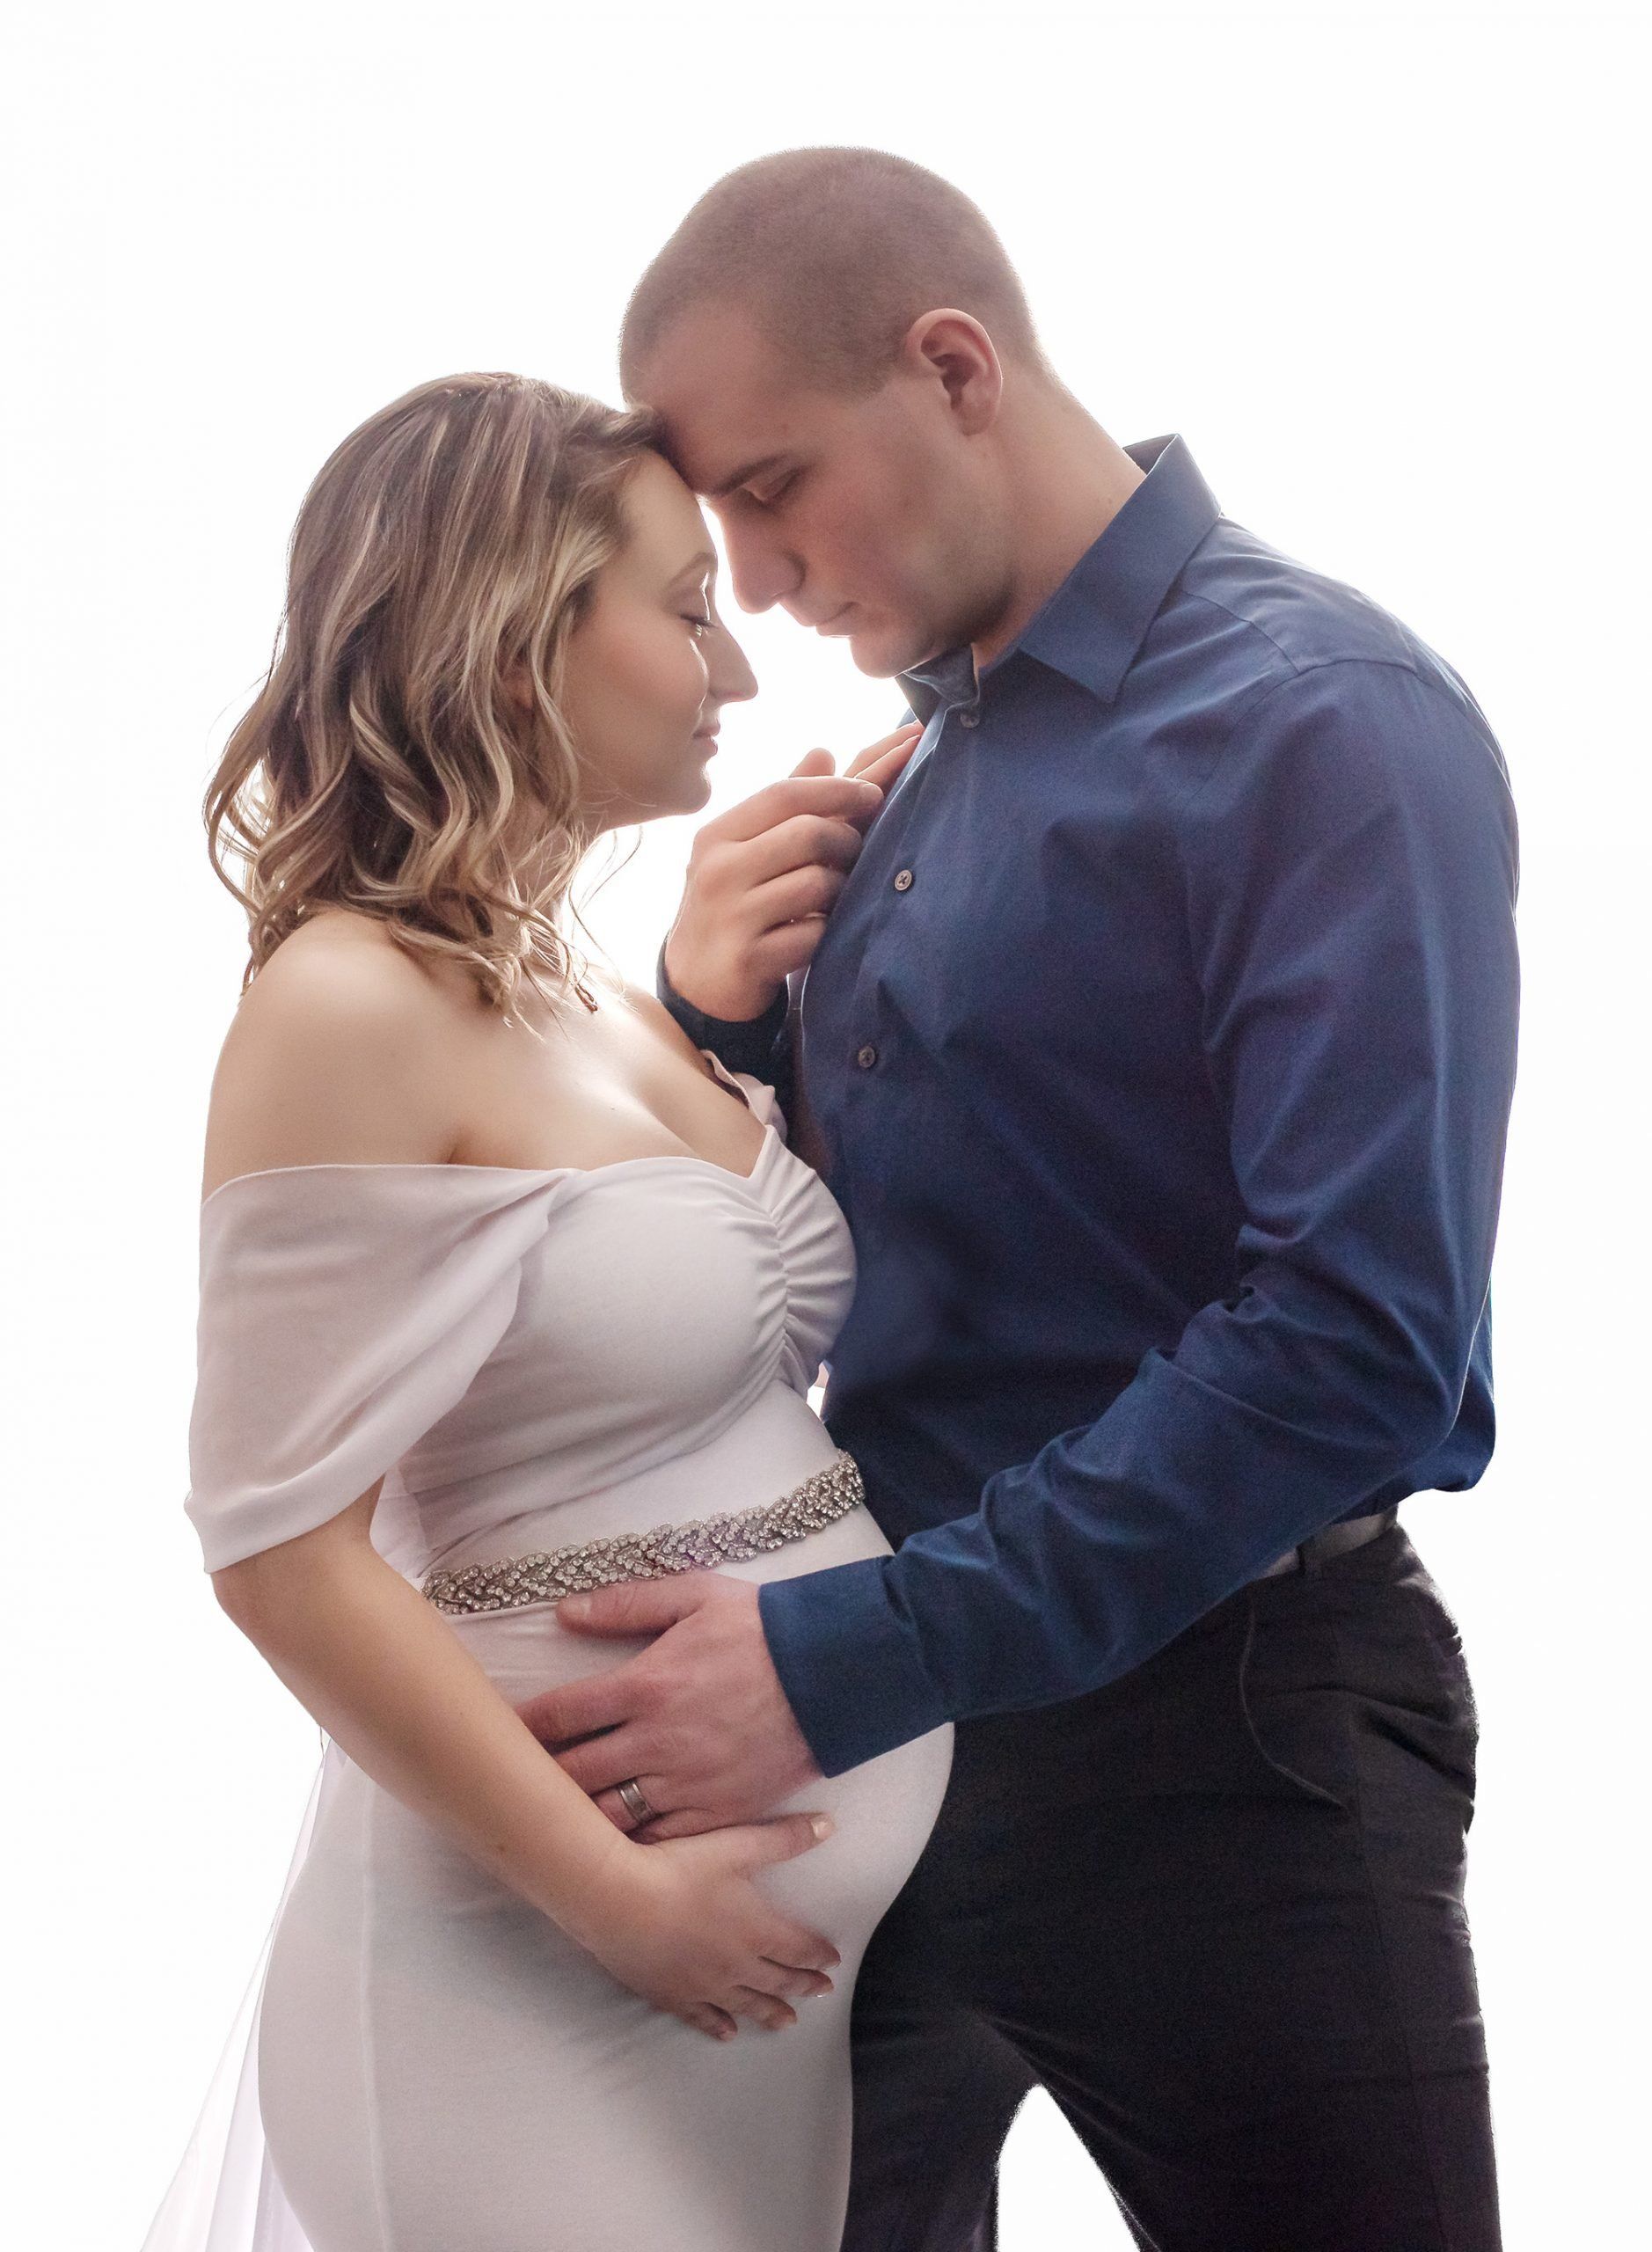 partner holding pregnant womans stomach in white gown while leaning in close